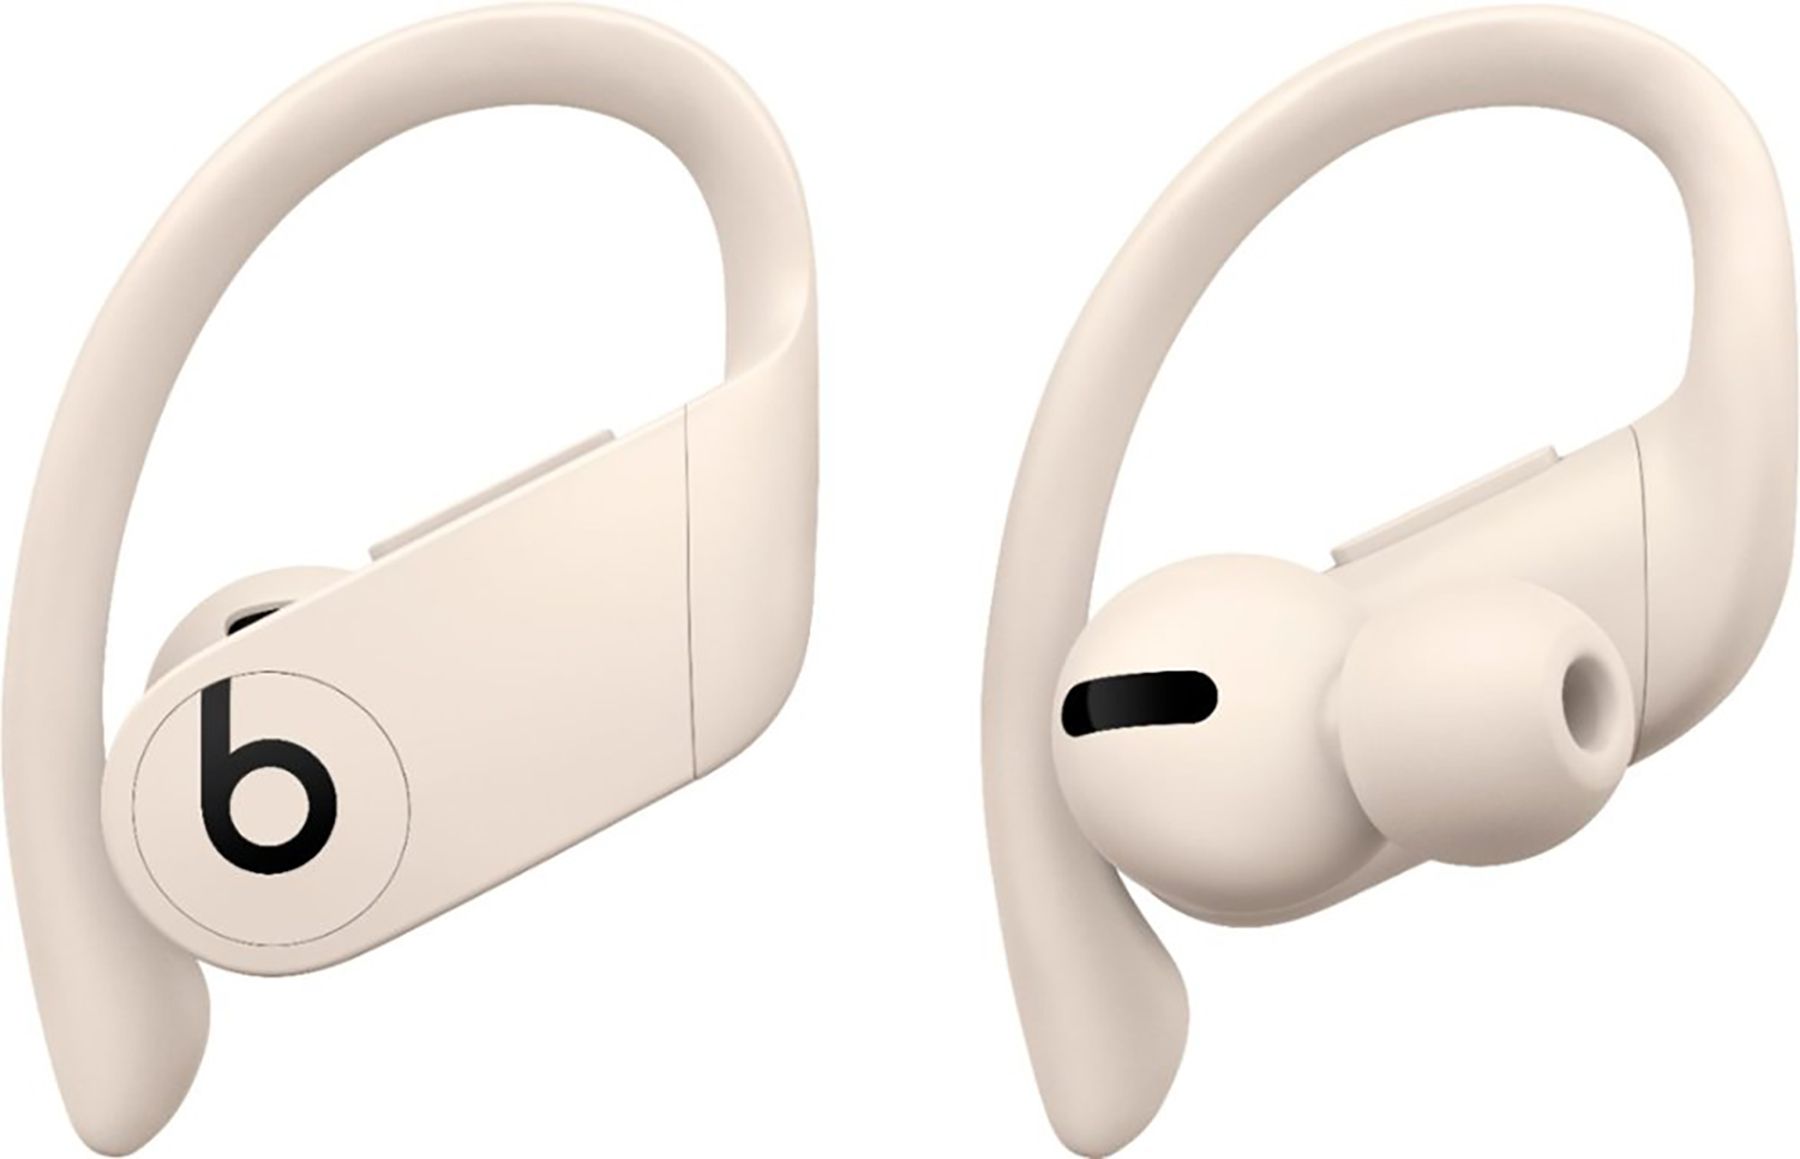 Powerbeats Pro Review: Good sound if you get the right